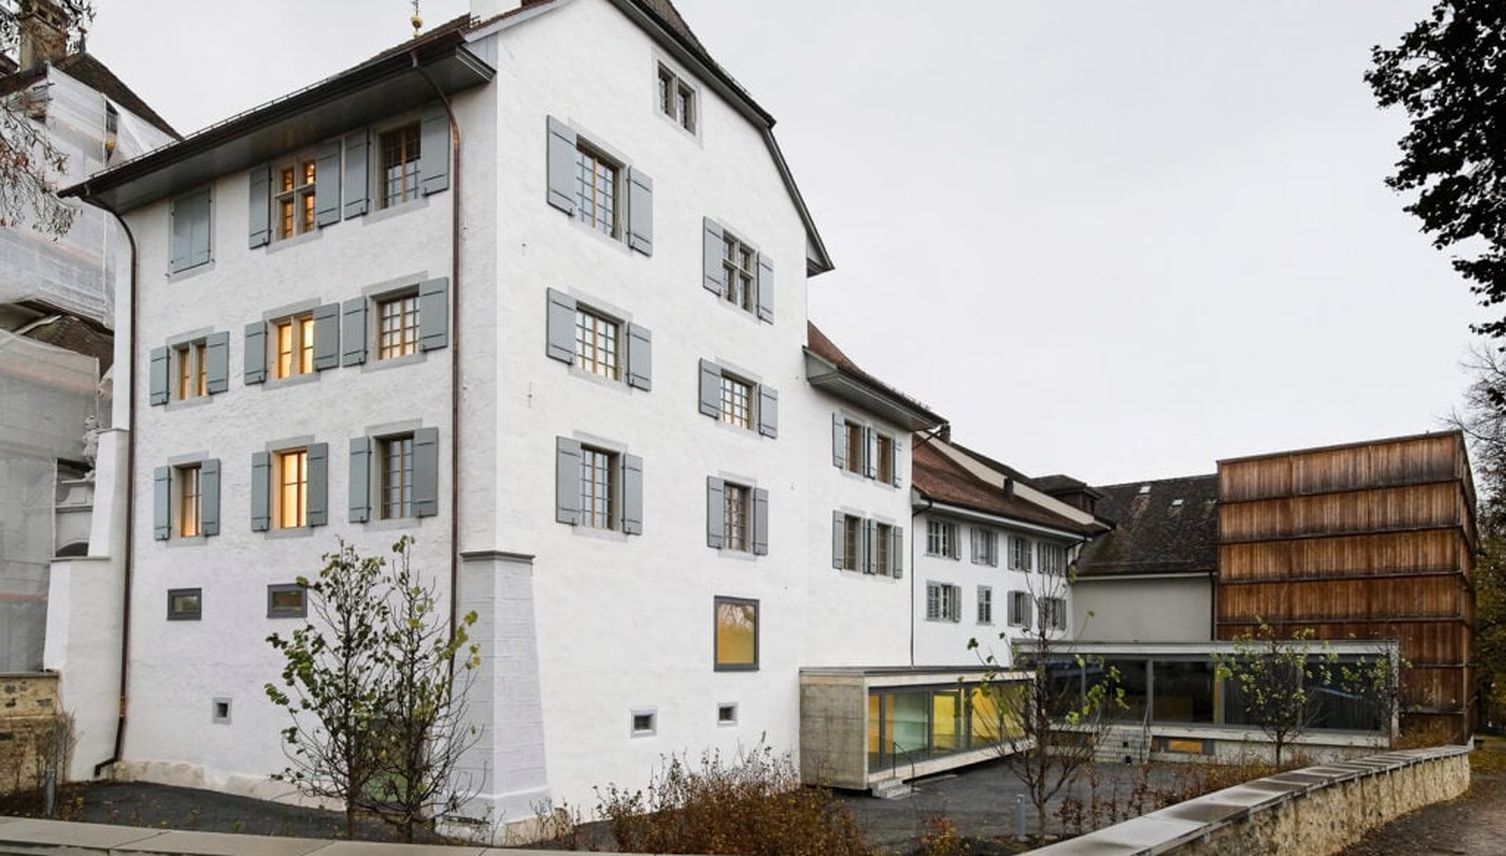 Museum in Sursee plant allfällige Neuausrichtung